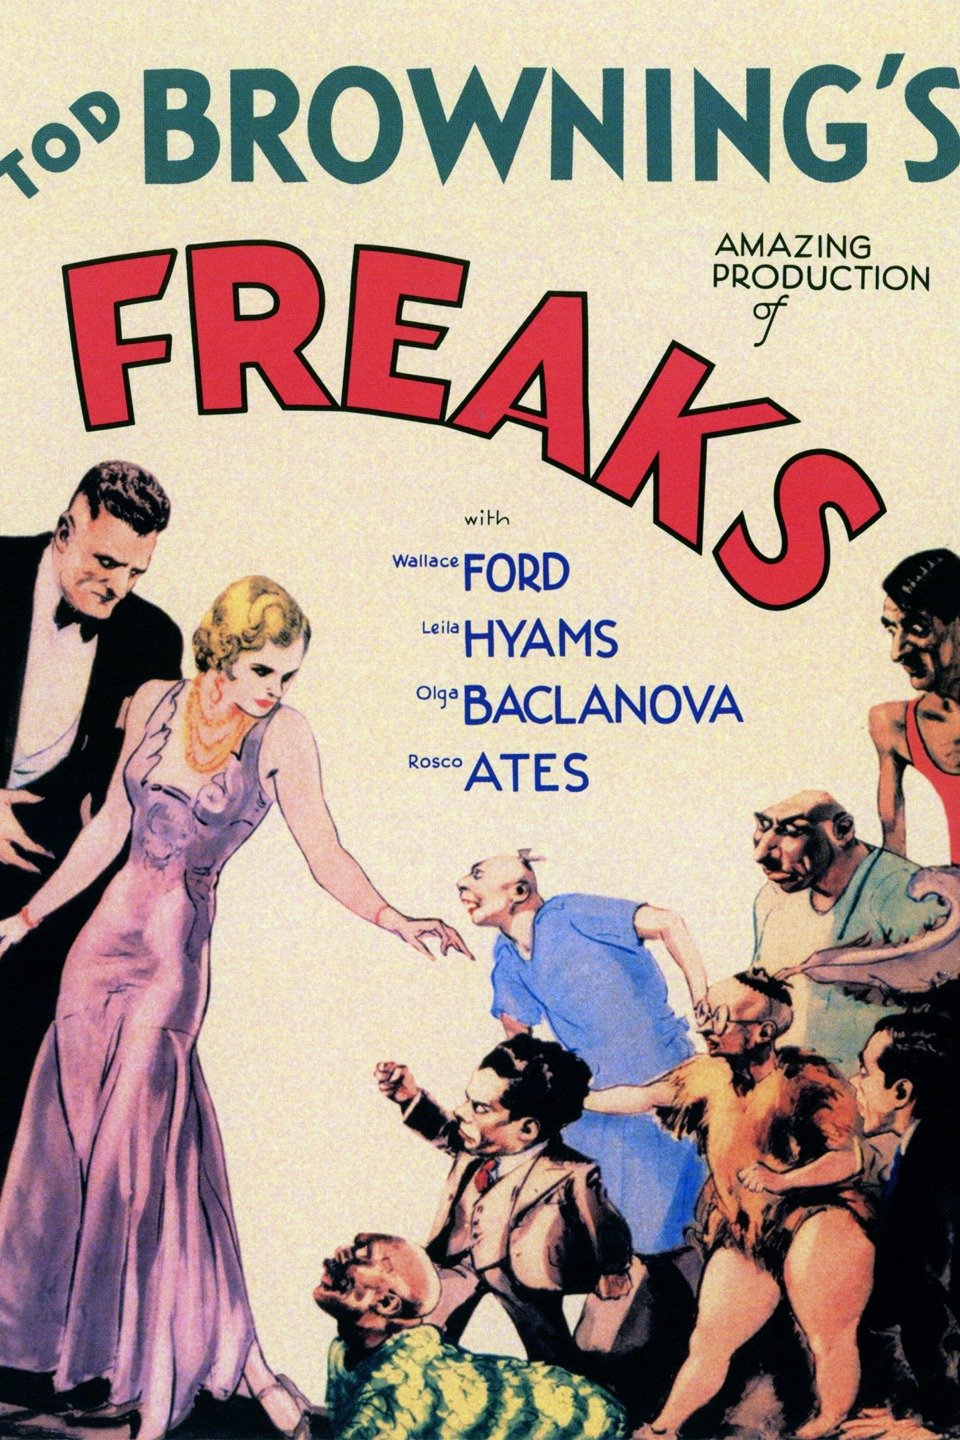 Freaks - Top 25 Horror Movies of All Time